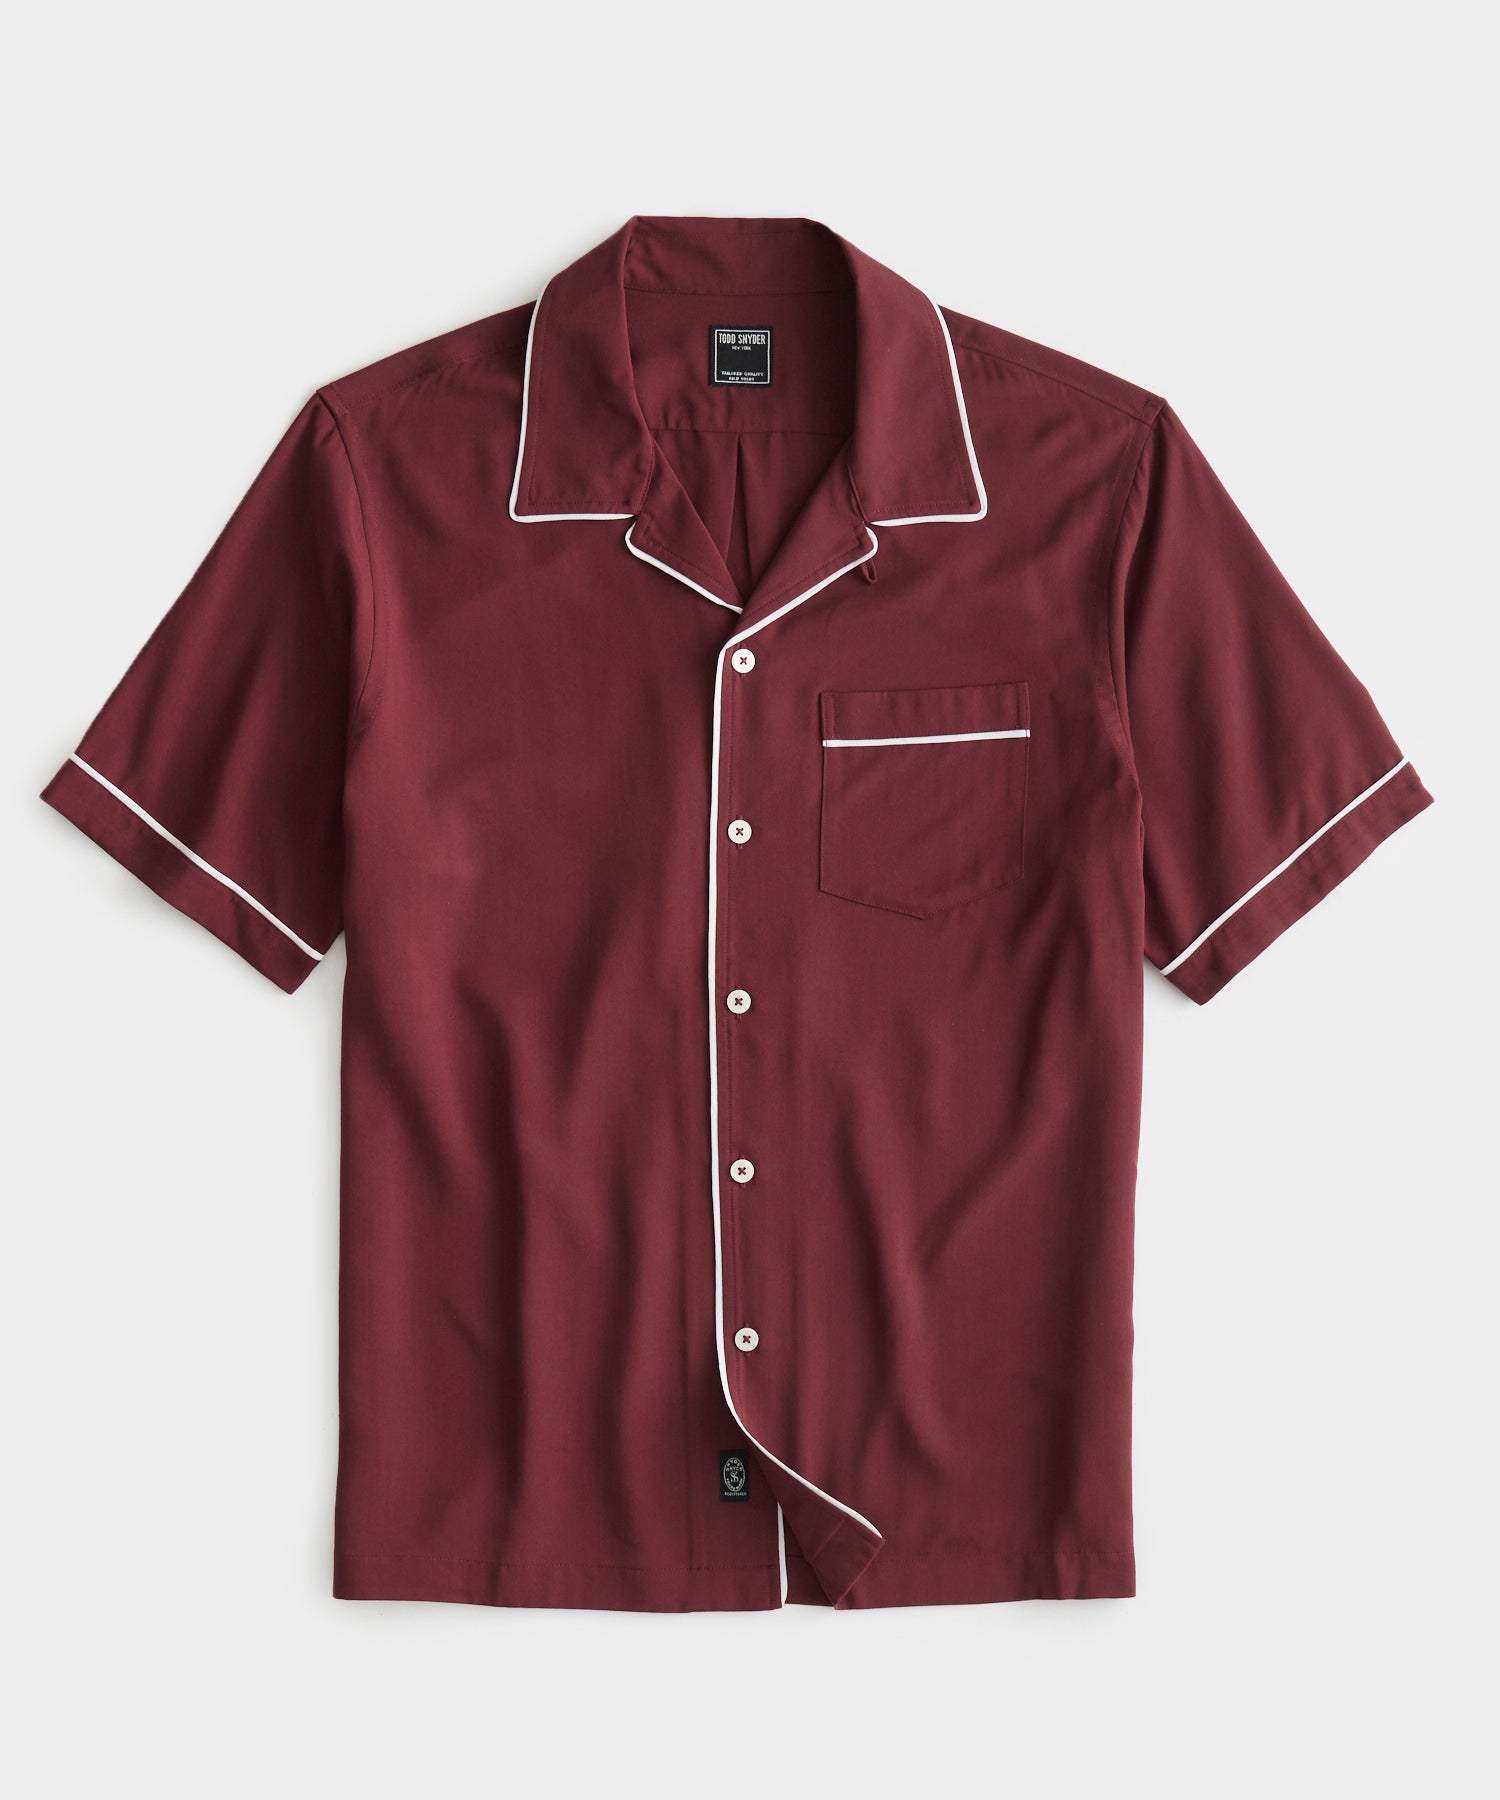 Japanese Tipped Rayon Lounge Shirt in Burgundy